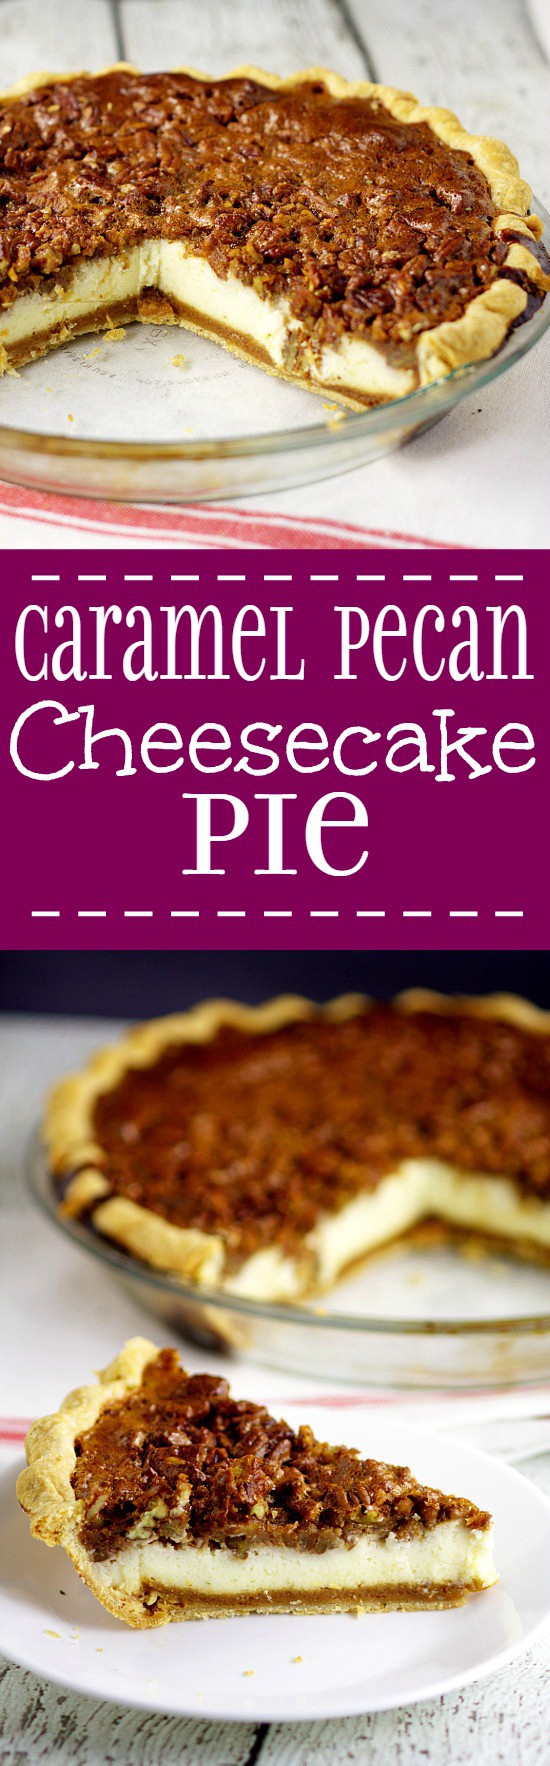 The only thing better than classic pecan pie is Pecan Cheesecake Pie with the decadent caramel flavor of pecan pie filling, crunchy pecans and creamy cheesecake. Pecan pie recipe combined with classic cheesecake to make one fantastic dessert recipe! Two of my favorites!